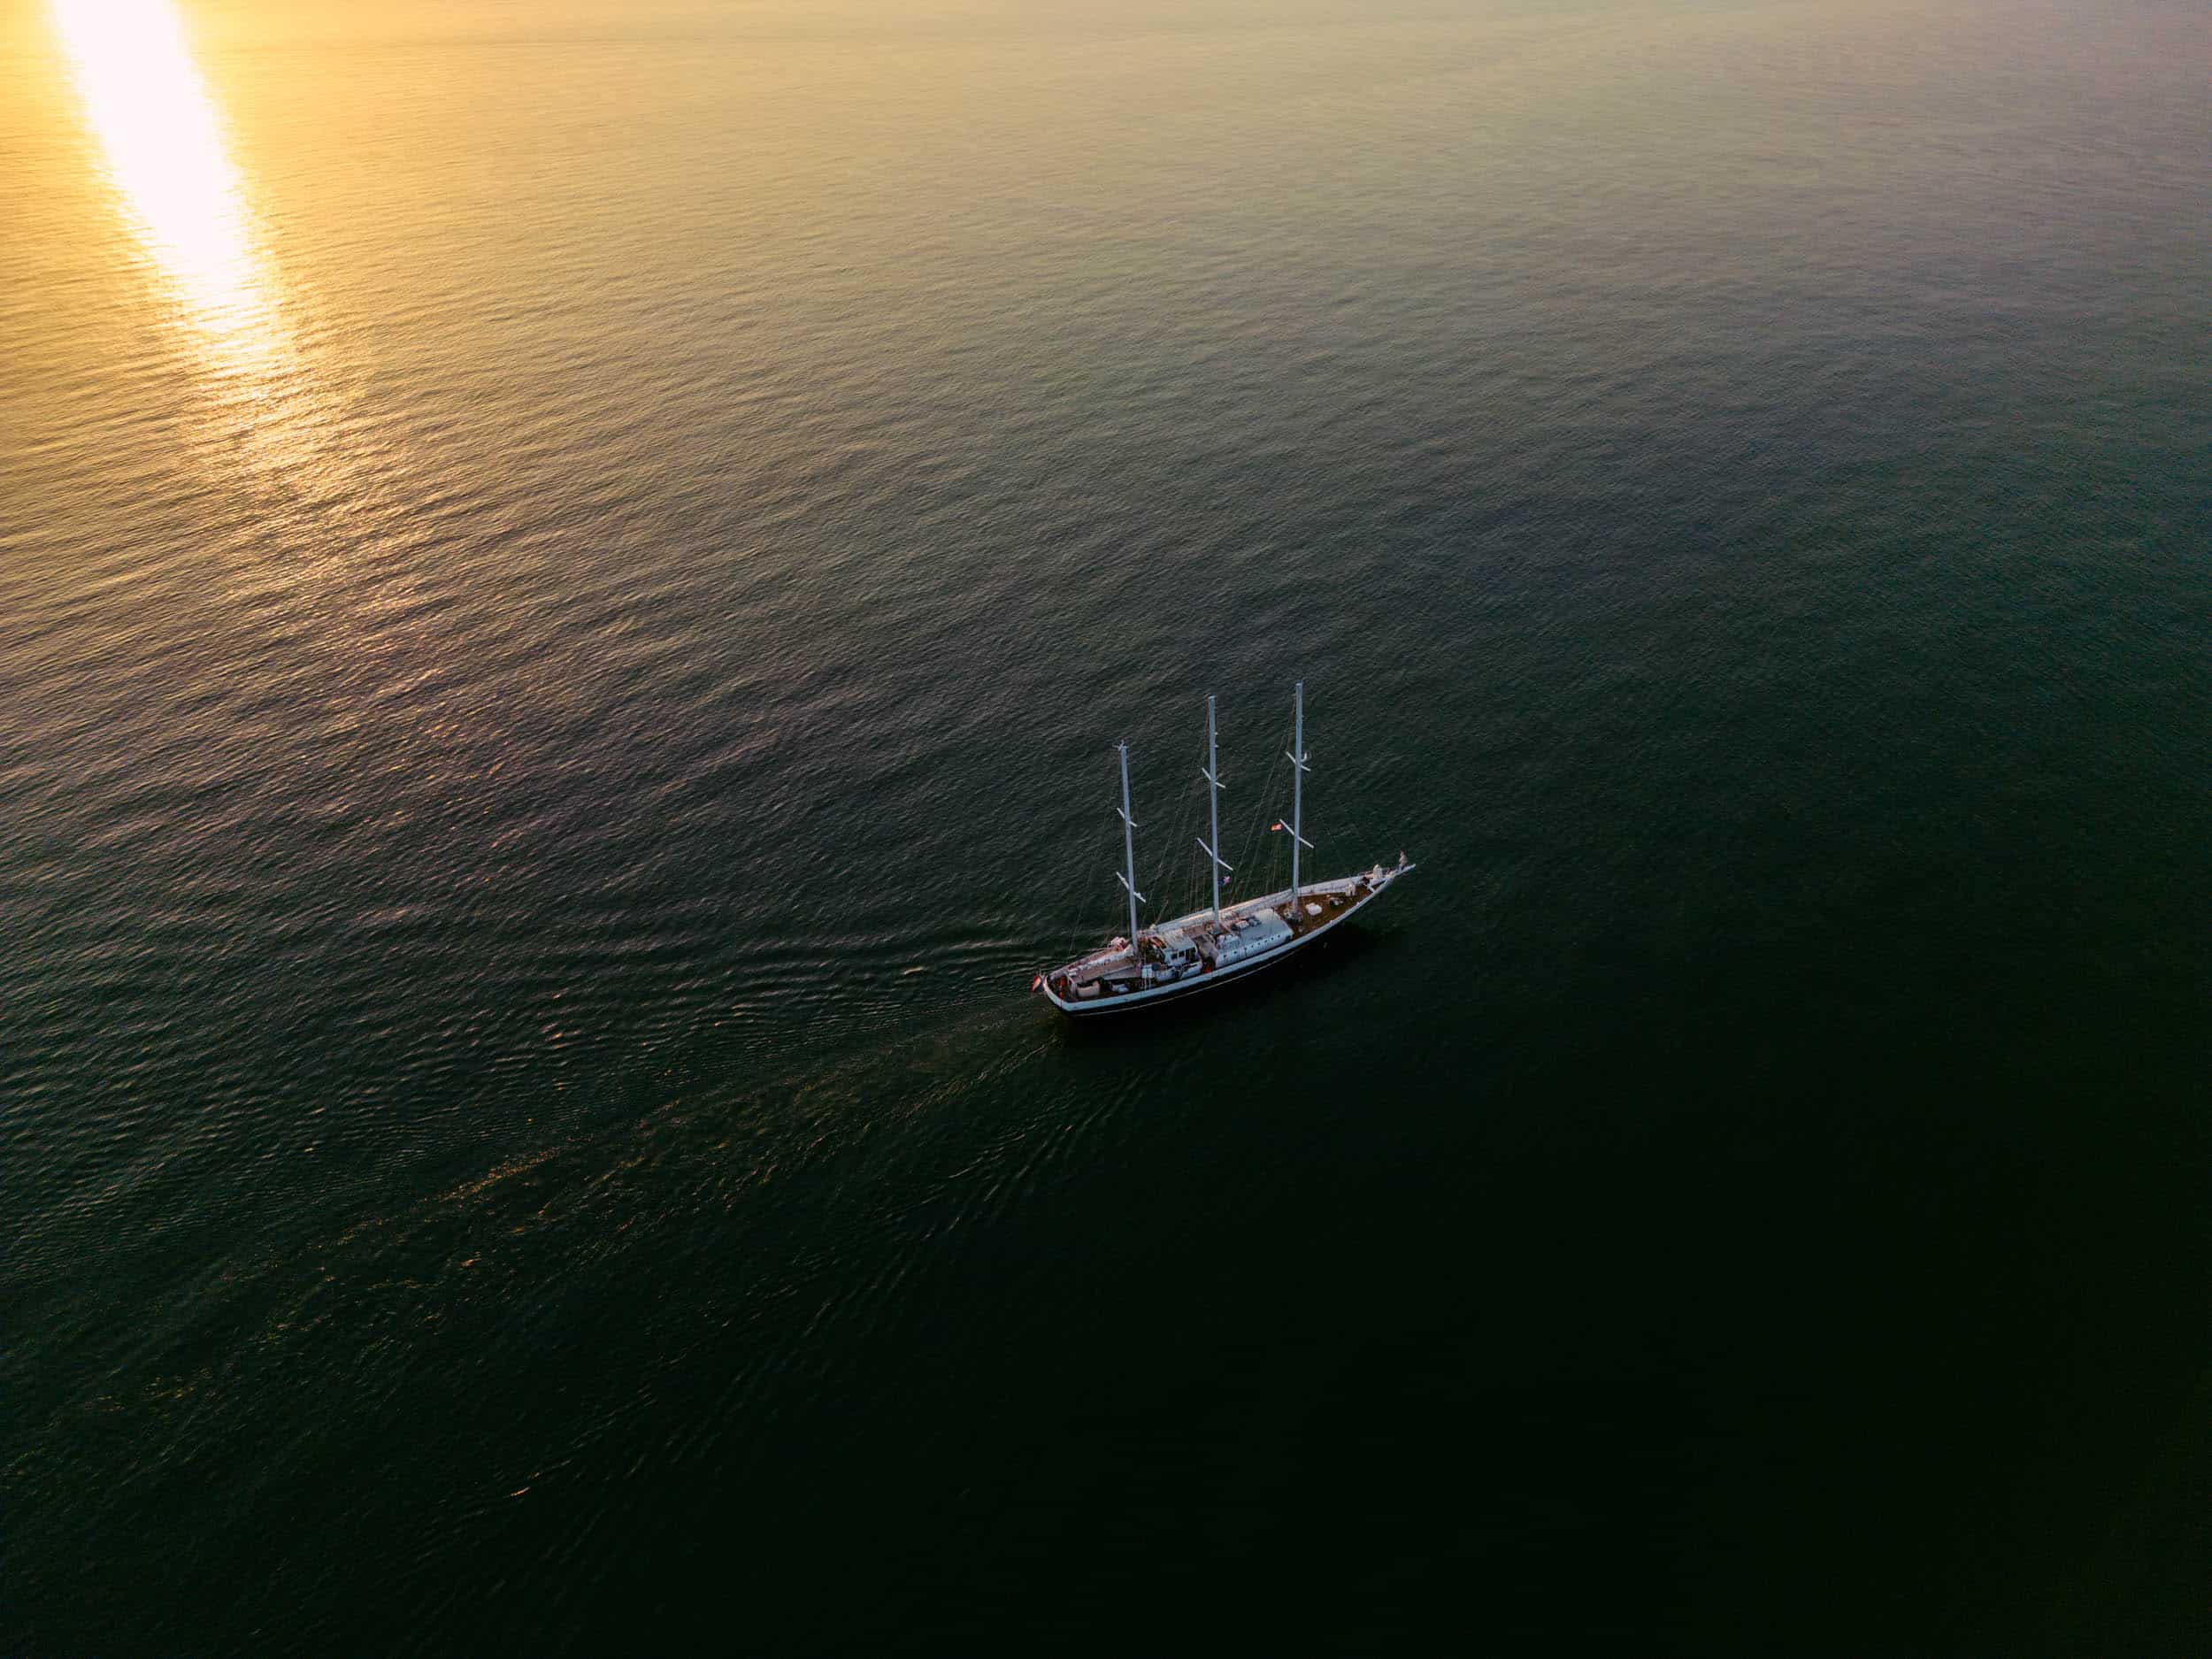 Ship at sea created by drone pilot